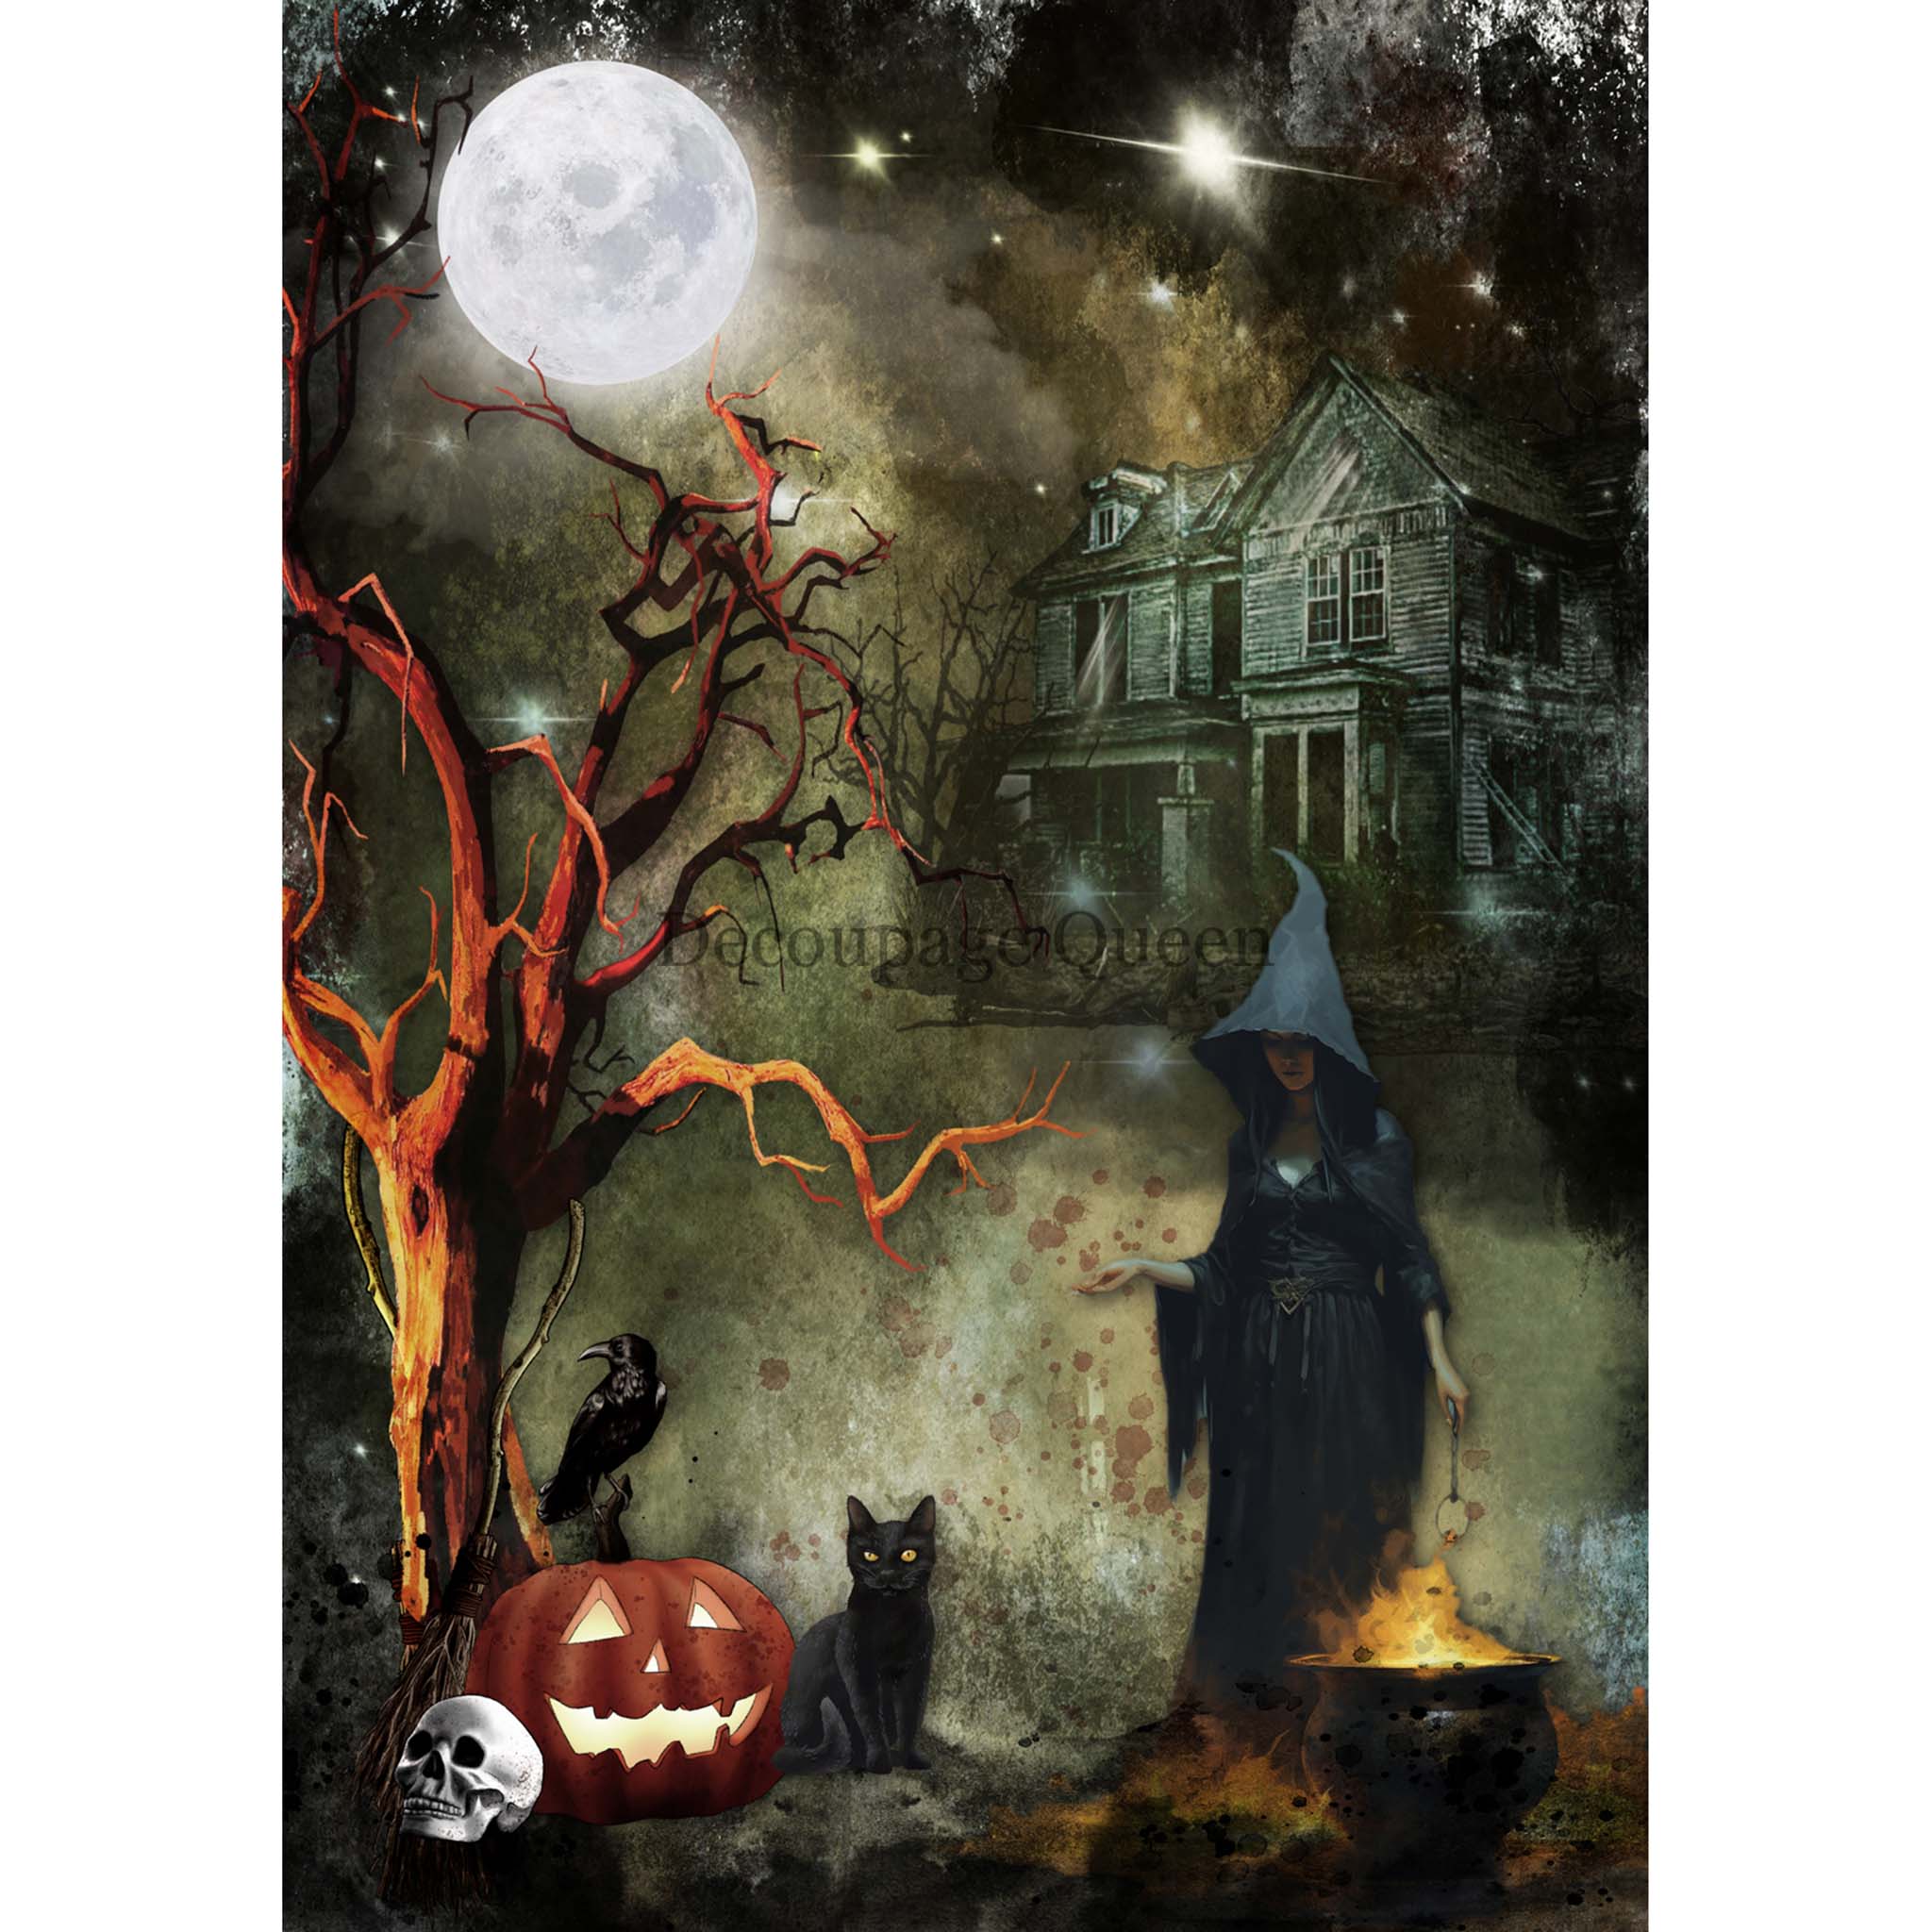 A4 decoupage paper tht features a collage of a black cat, Jack-O-Lantern, skull, bare tree, a raven, and a woman in a black dress and pointy hood over a cauldron all against a grunge background with a spooky old wood house and full moon. White borders are on the sides.